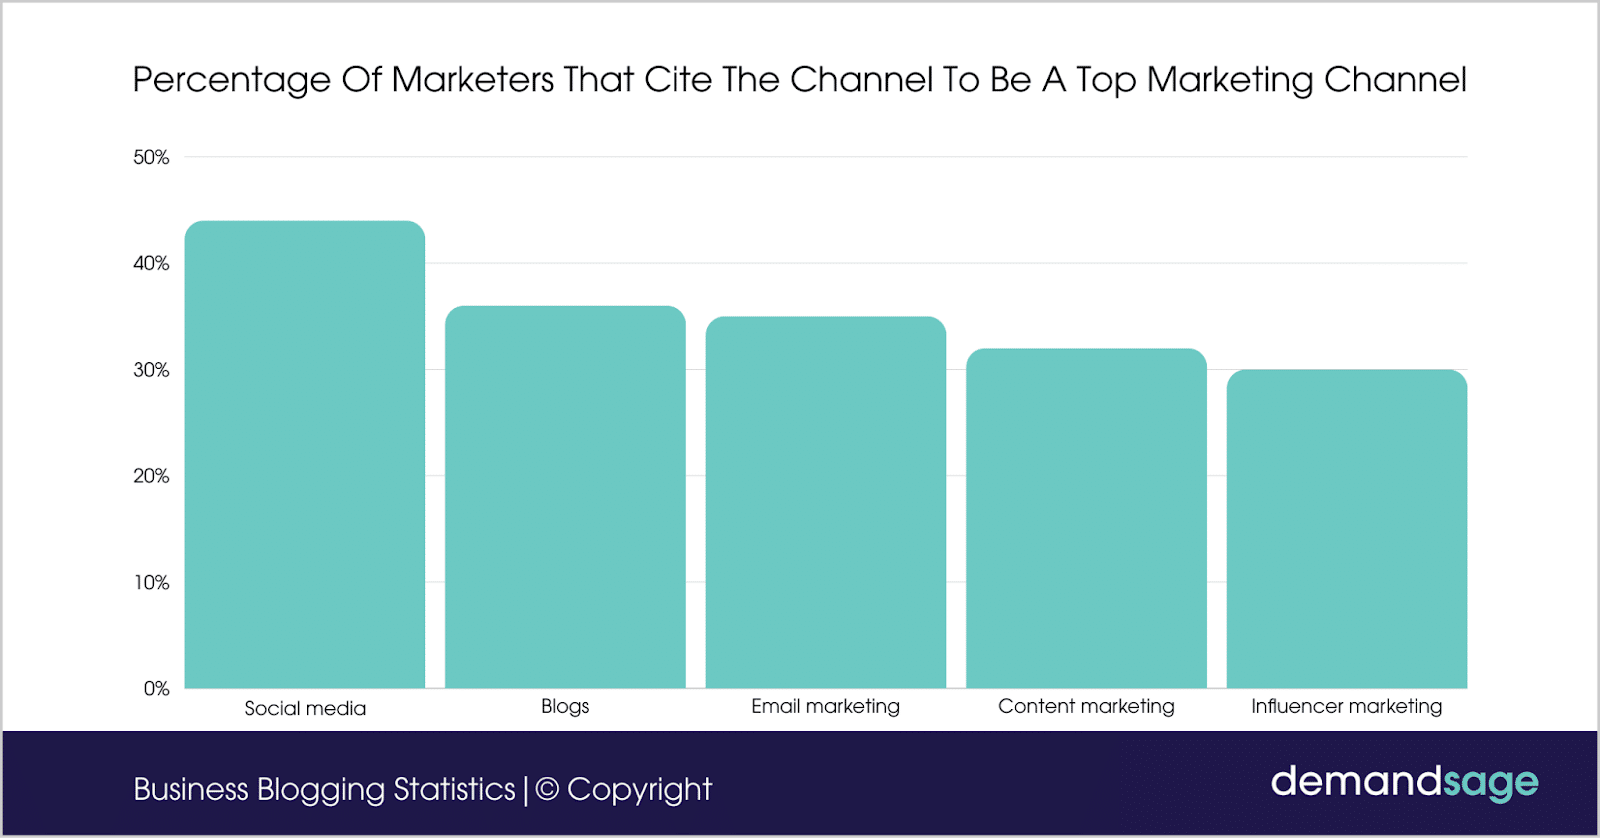 Percentage of marketers that cite the channel to be a top marketing channel